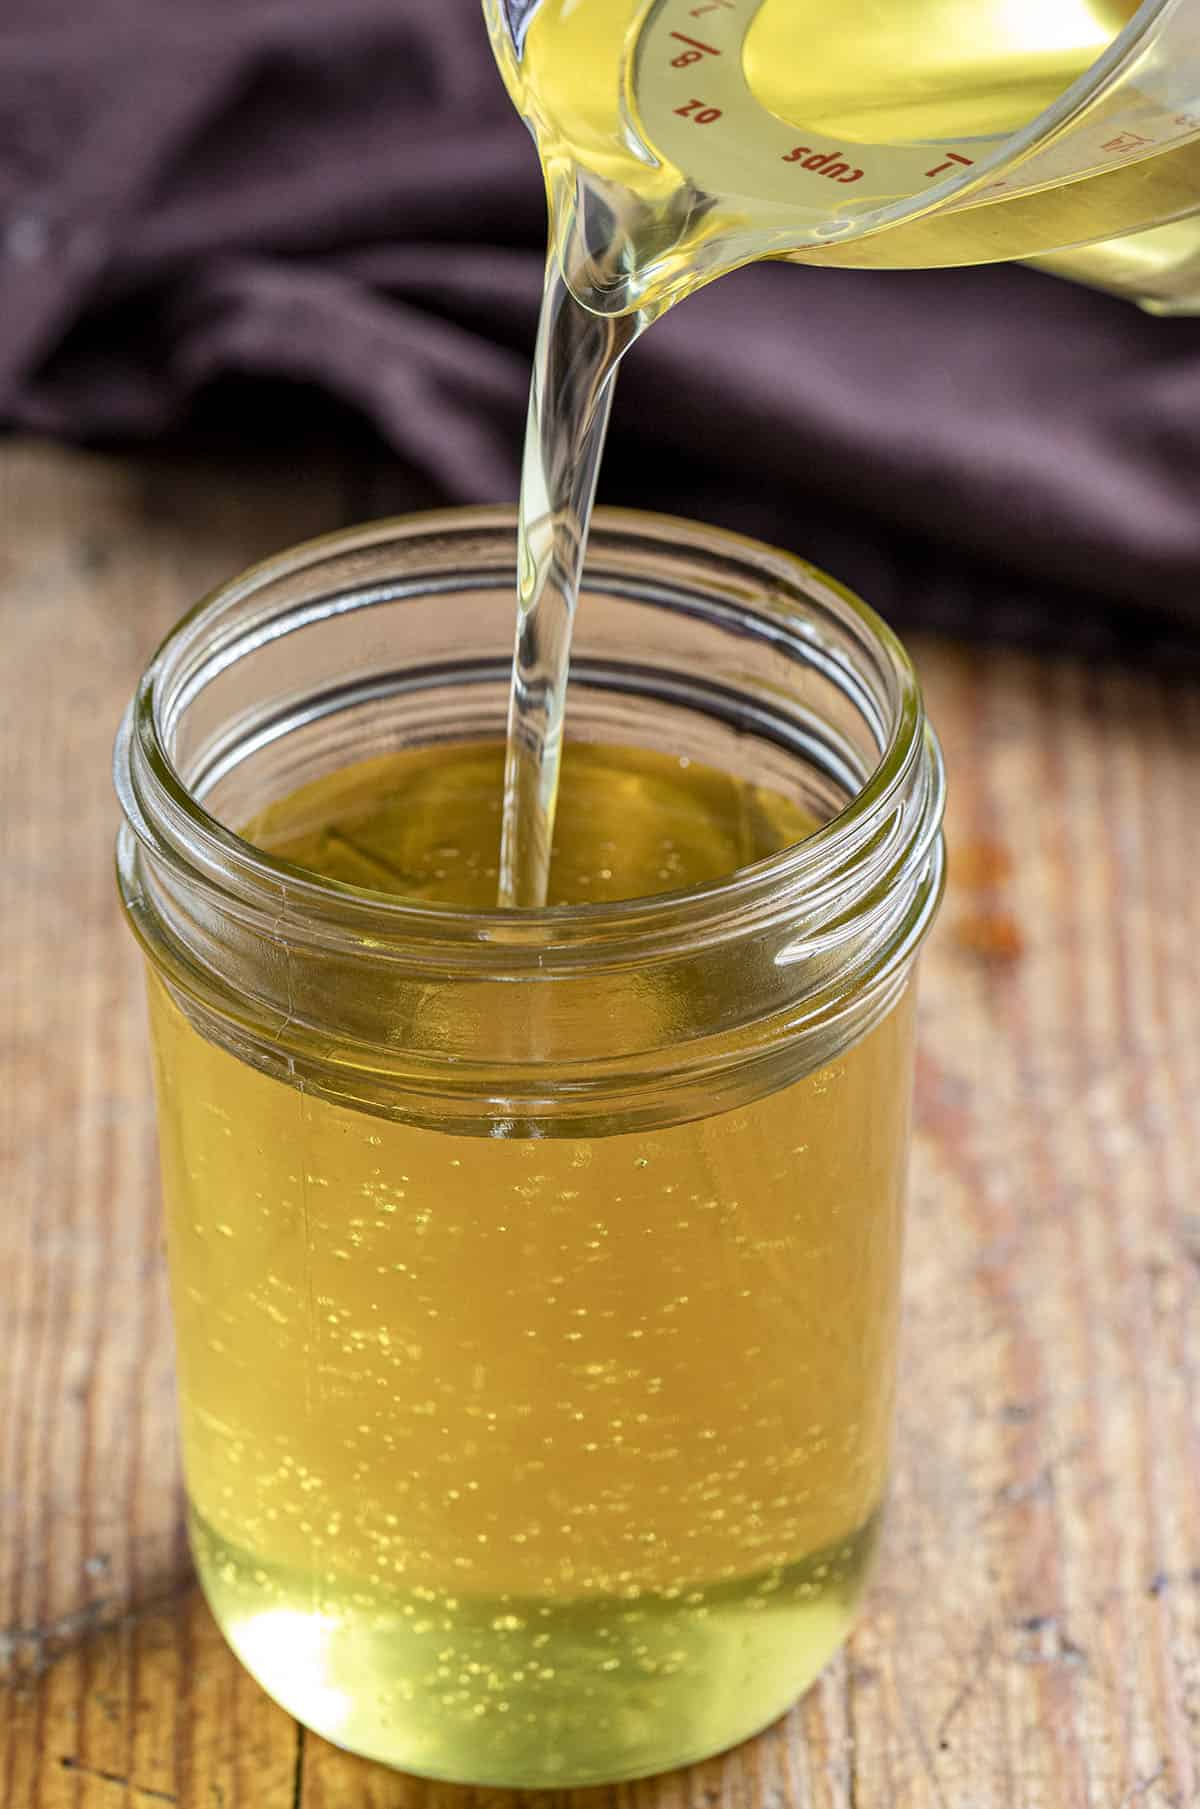 Pouring Clarified Oil into Jar. How to Clean Used Cooking Oil.